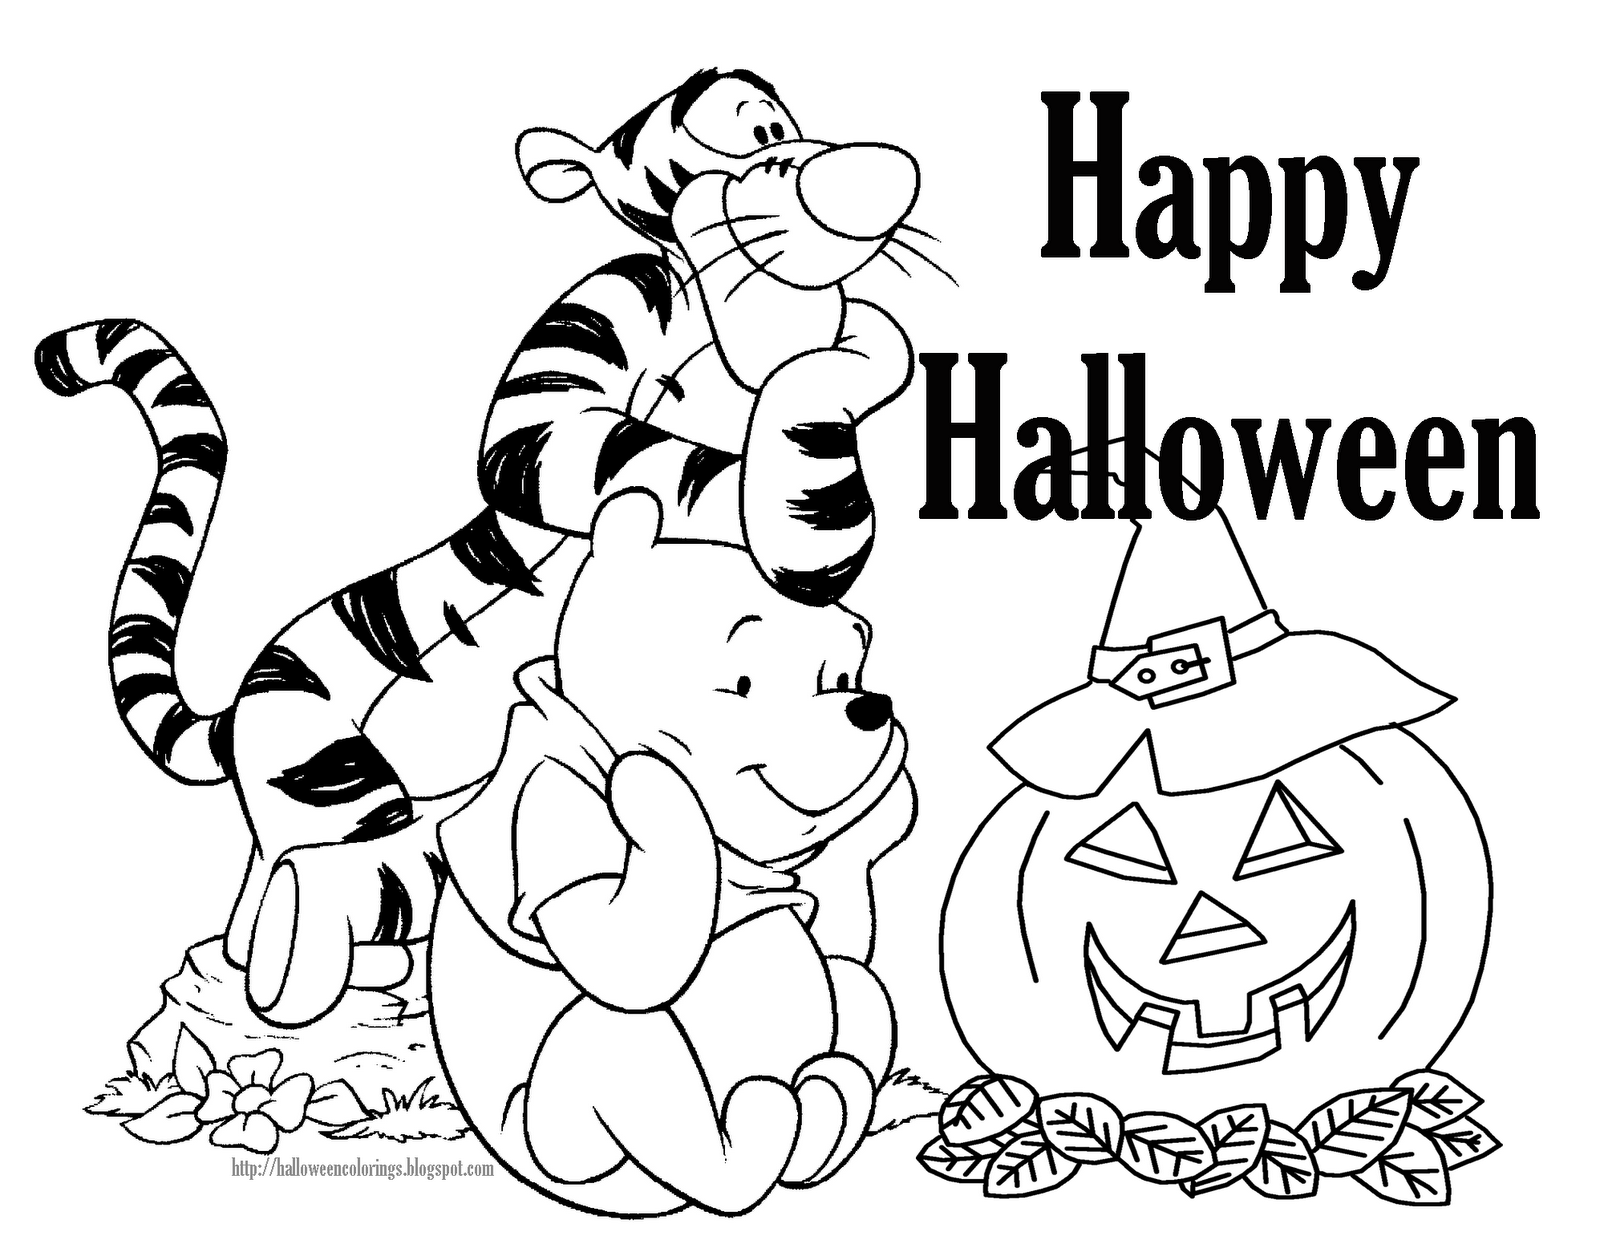 Printable Halloween Coloring Pages (20 Pictures) - Colorine.net | 9173